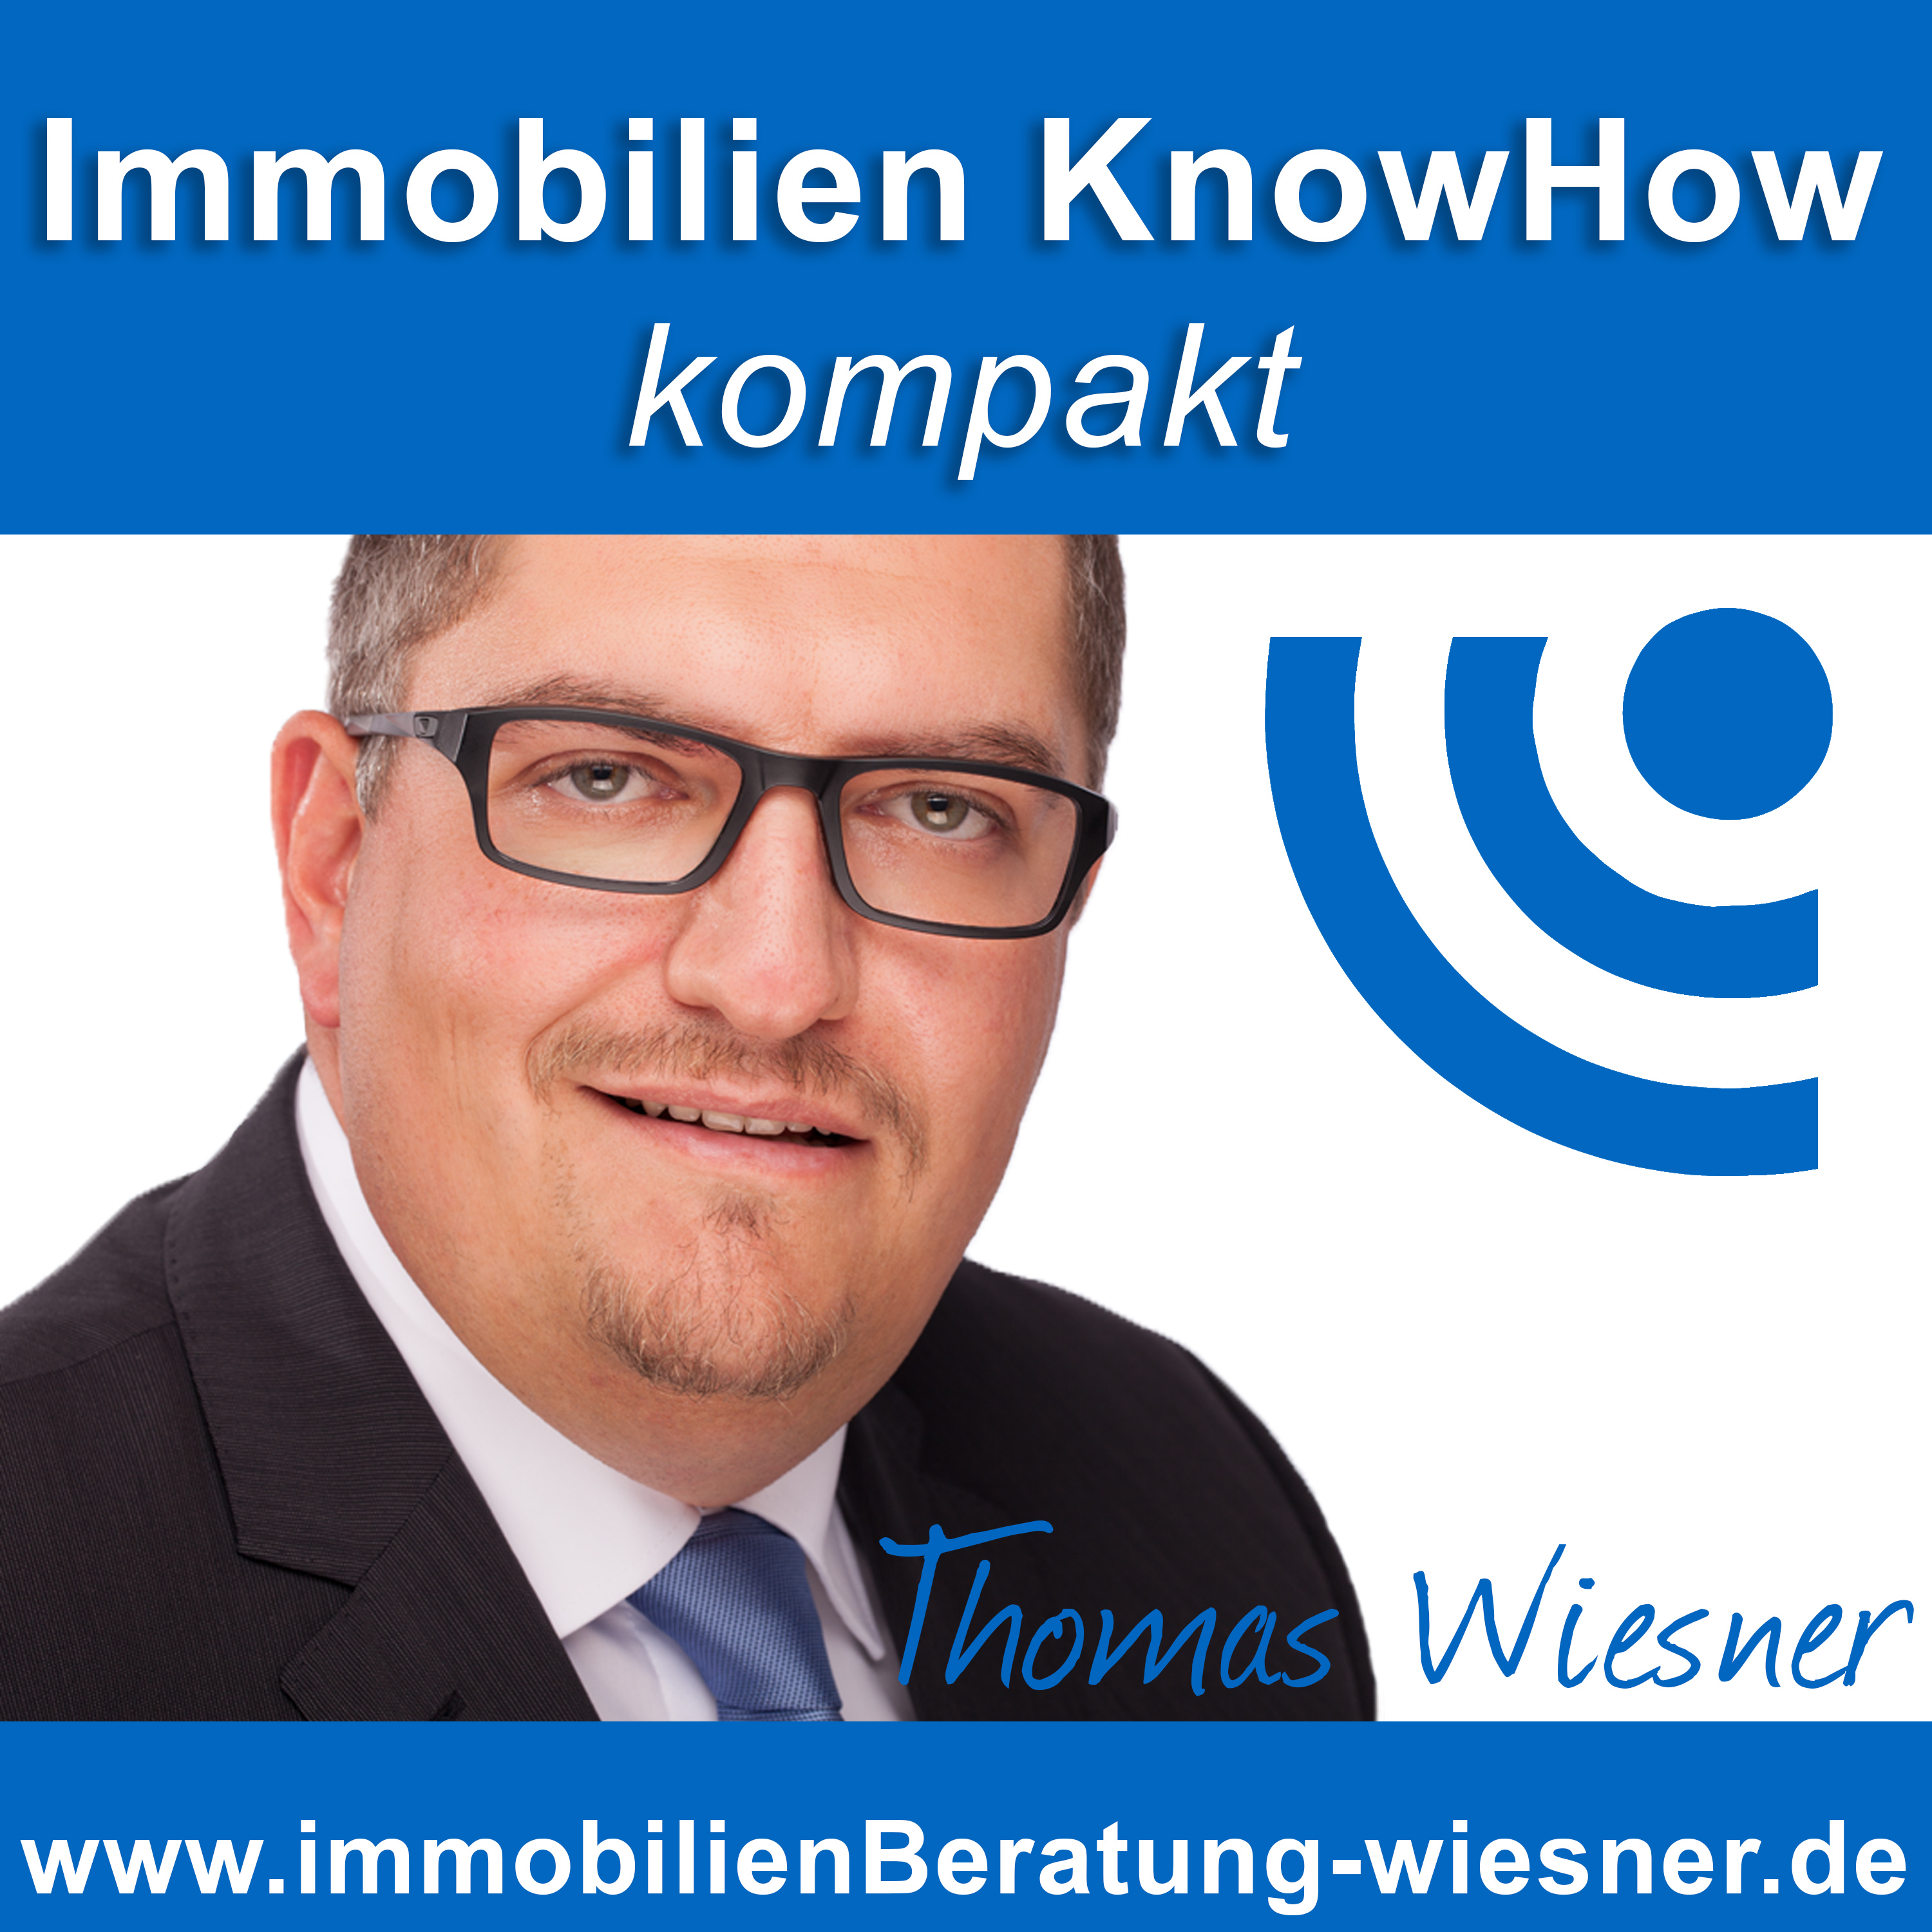 Immobilien KnowHow kompakt